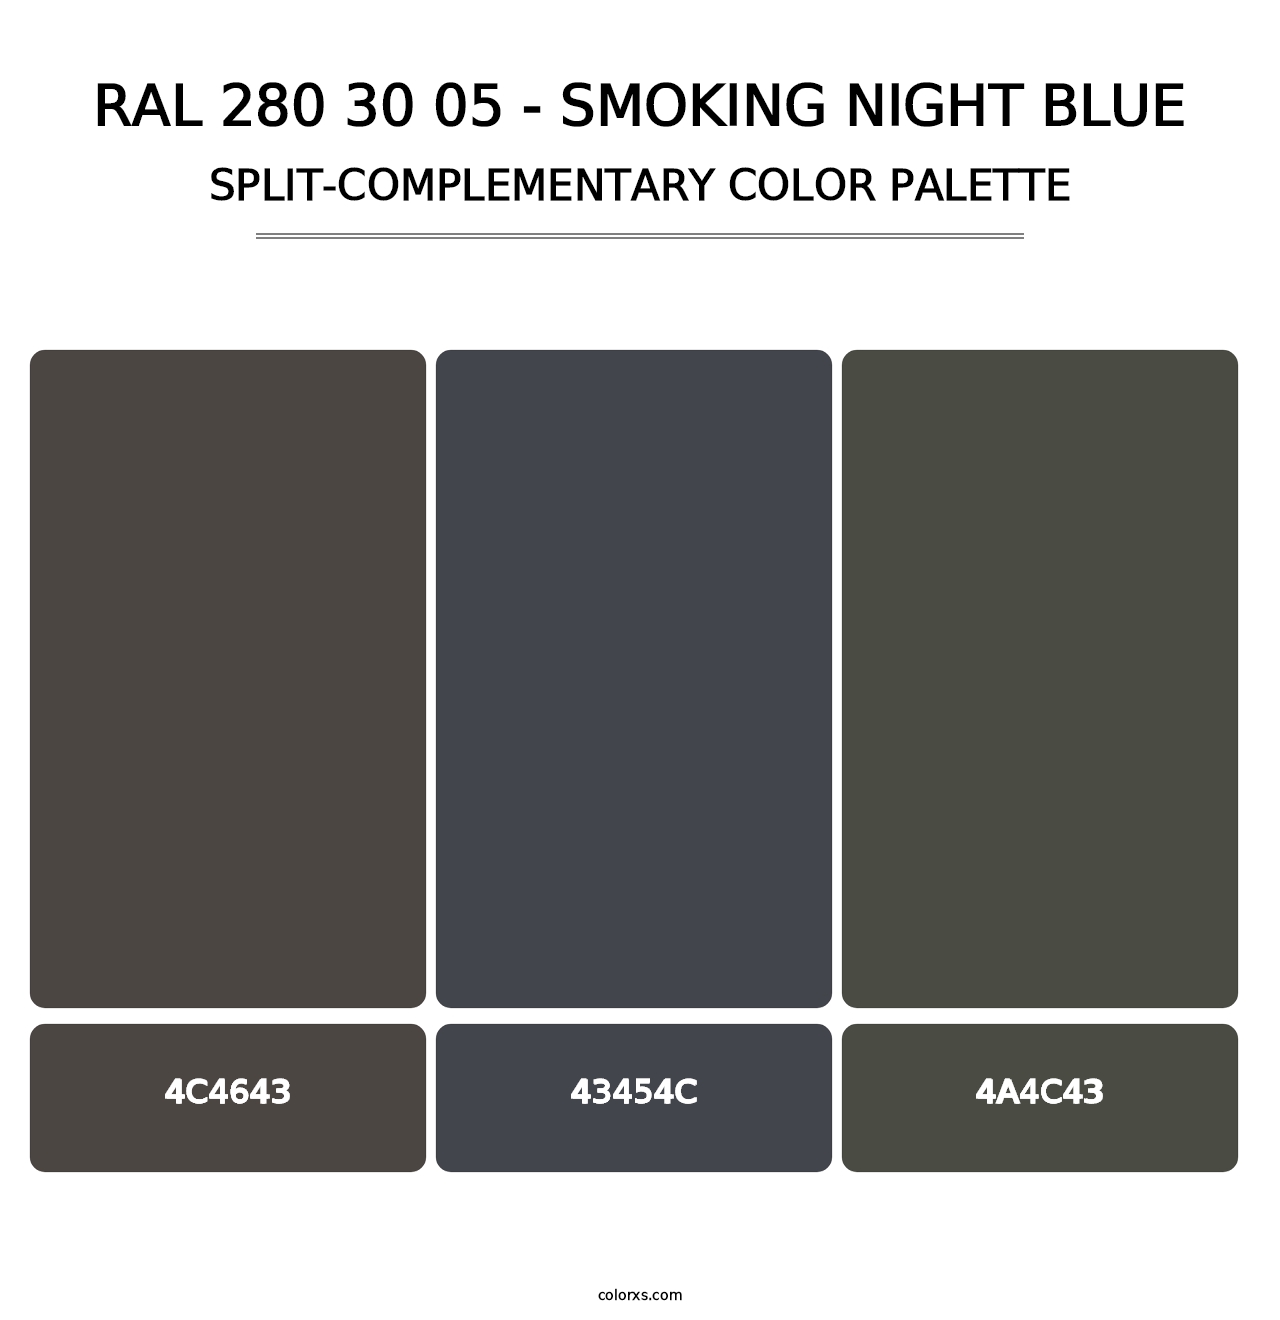 RAL 280 30 05 - Smoking Night Blue - Split-Complementary Color Palette